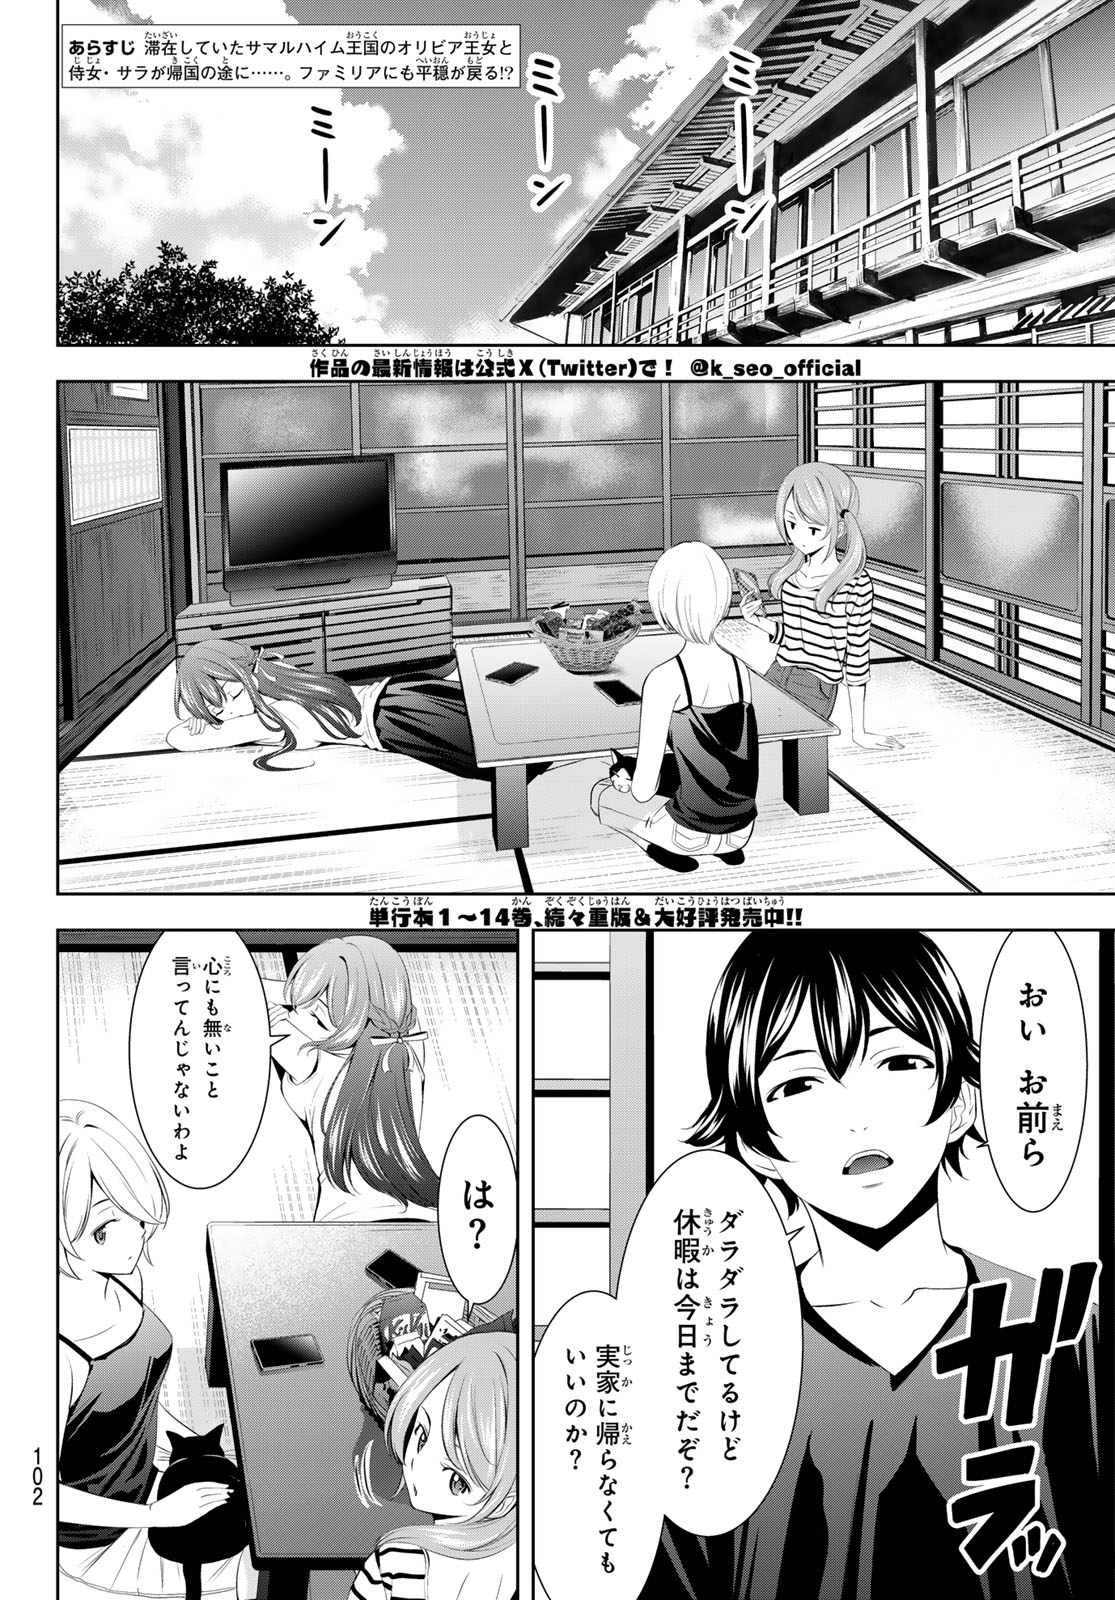 Megami no Cafe Terace - Chapter 147 - Page 2